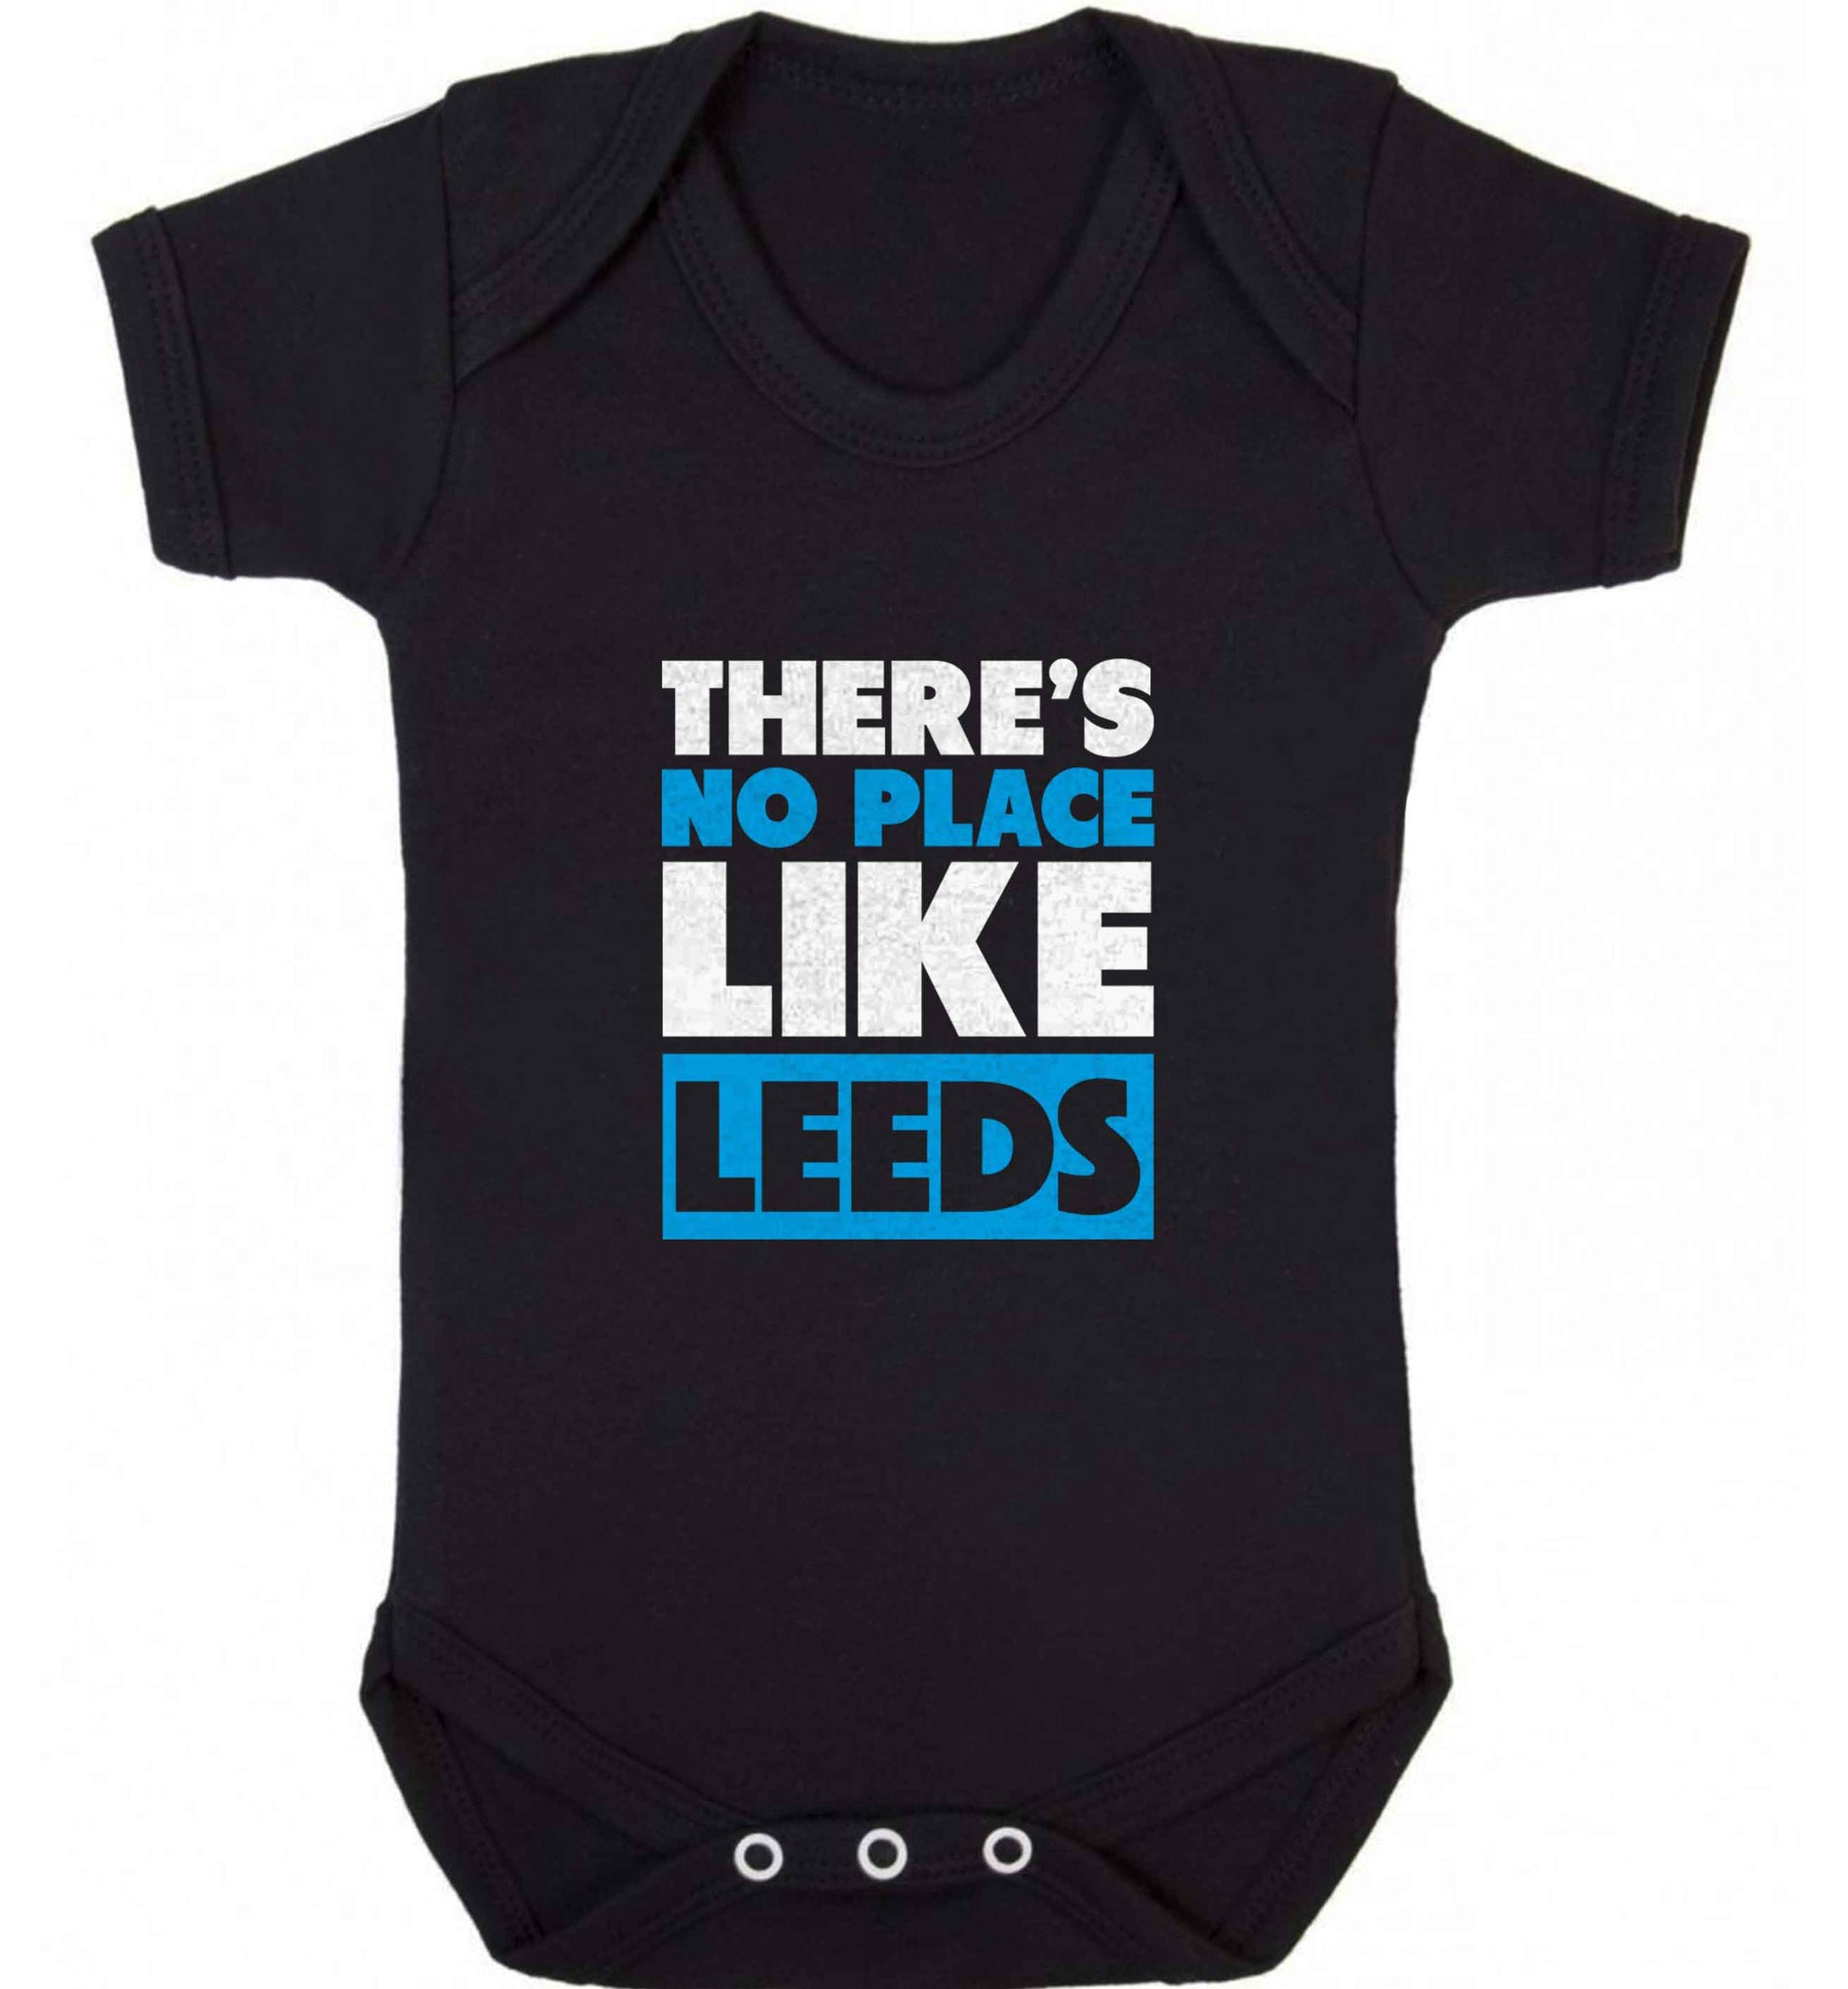 There's no place like Leeds baby vest black 18-24 months